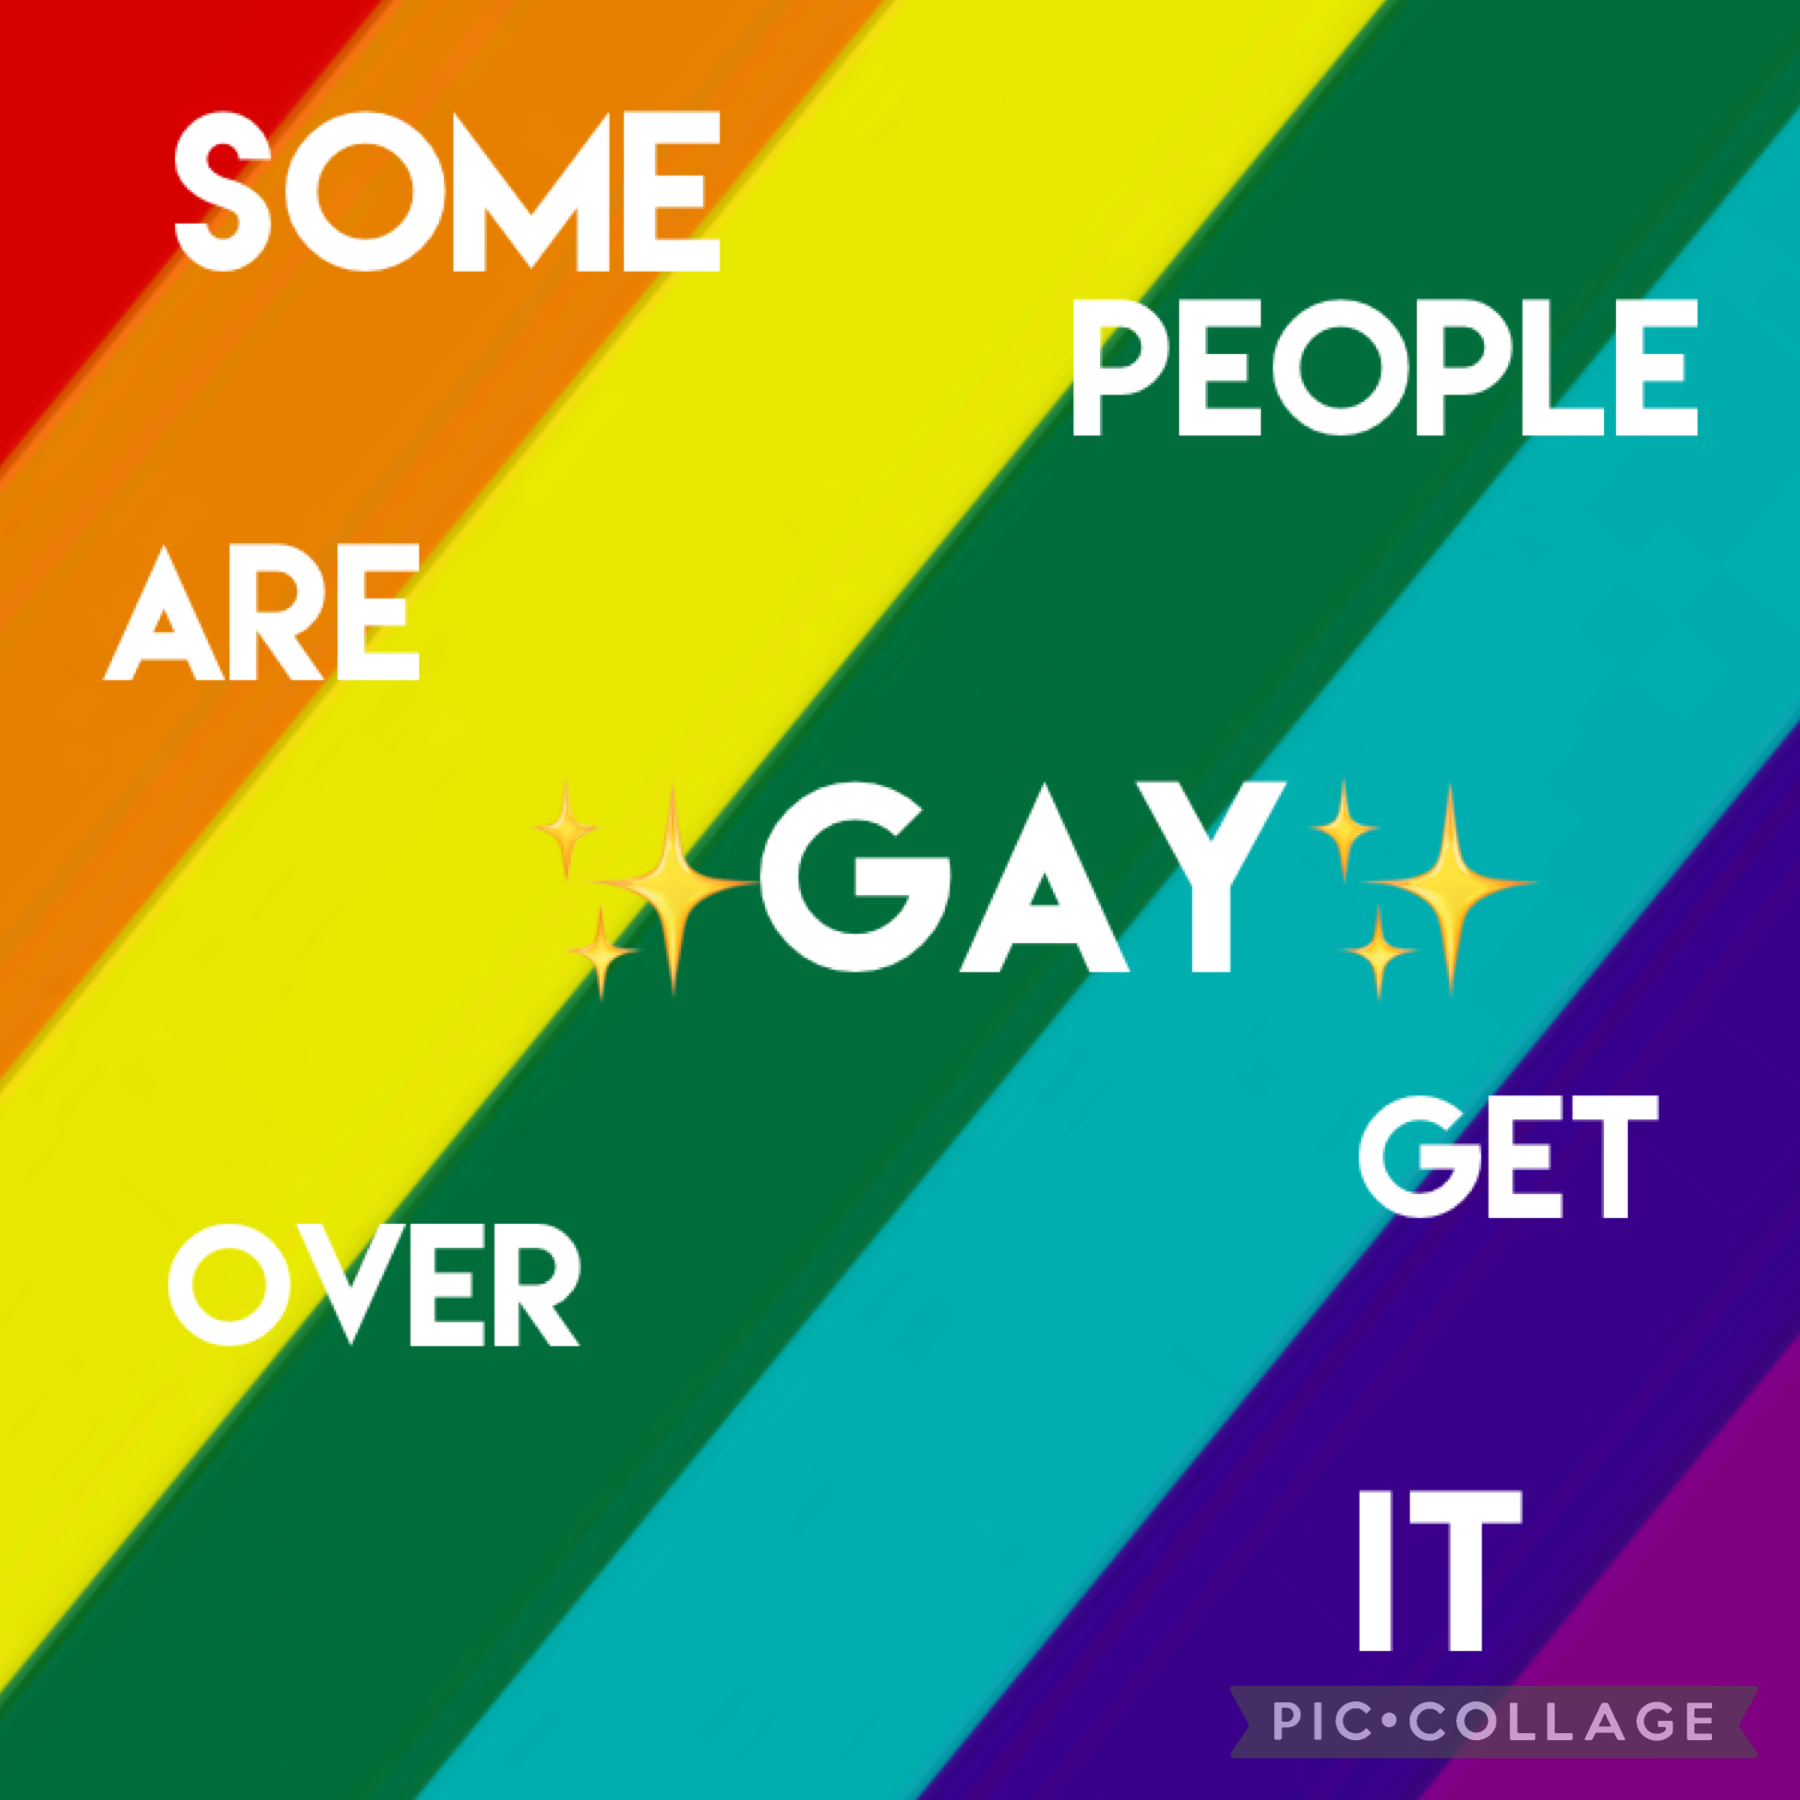 Shout out to the lgbtq+ community